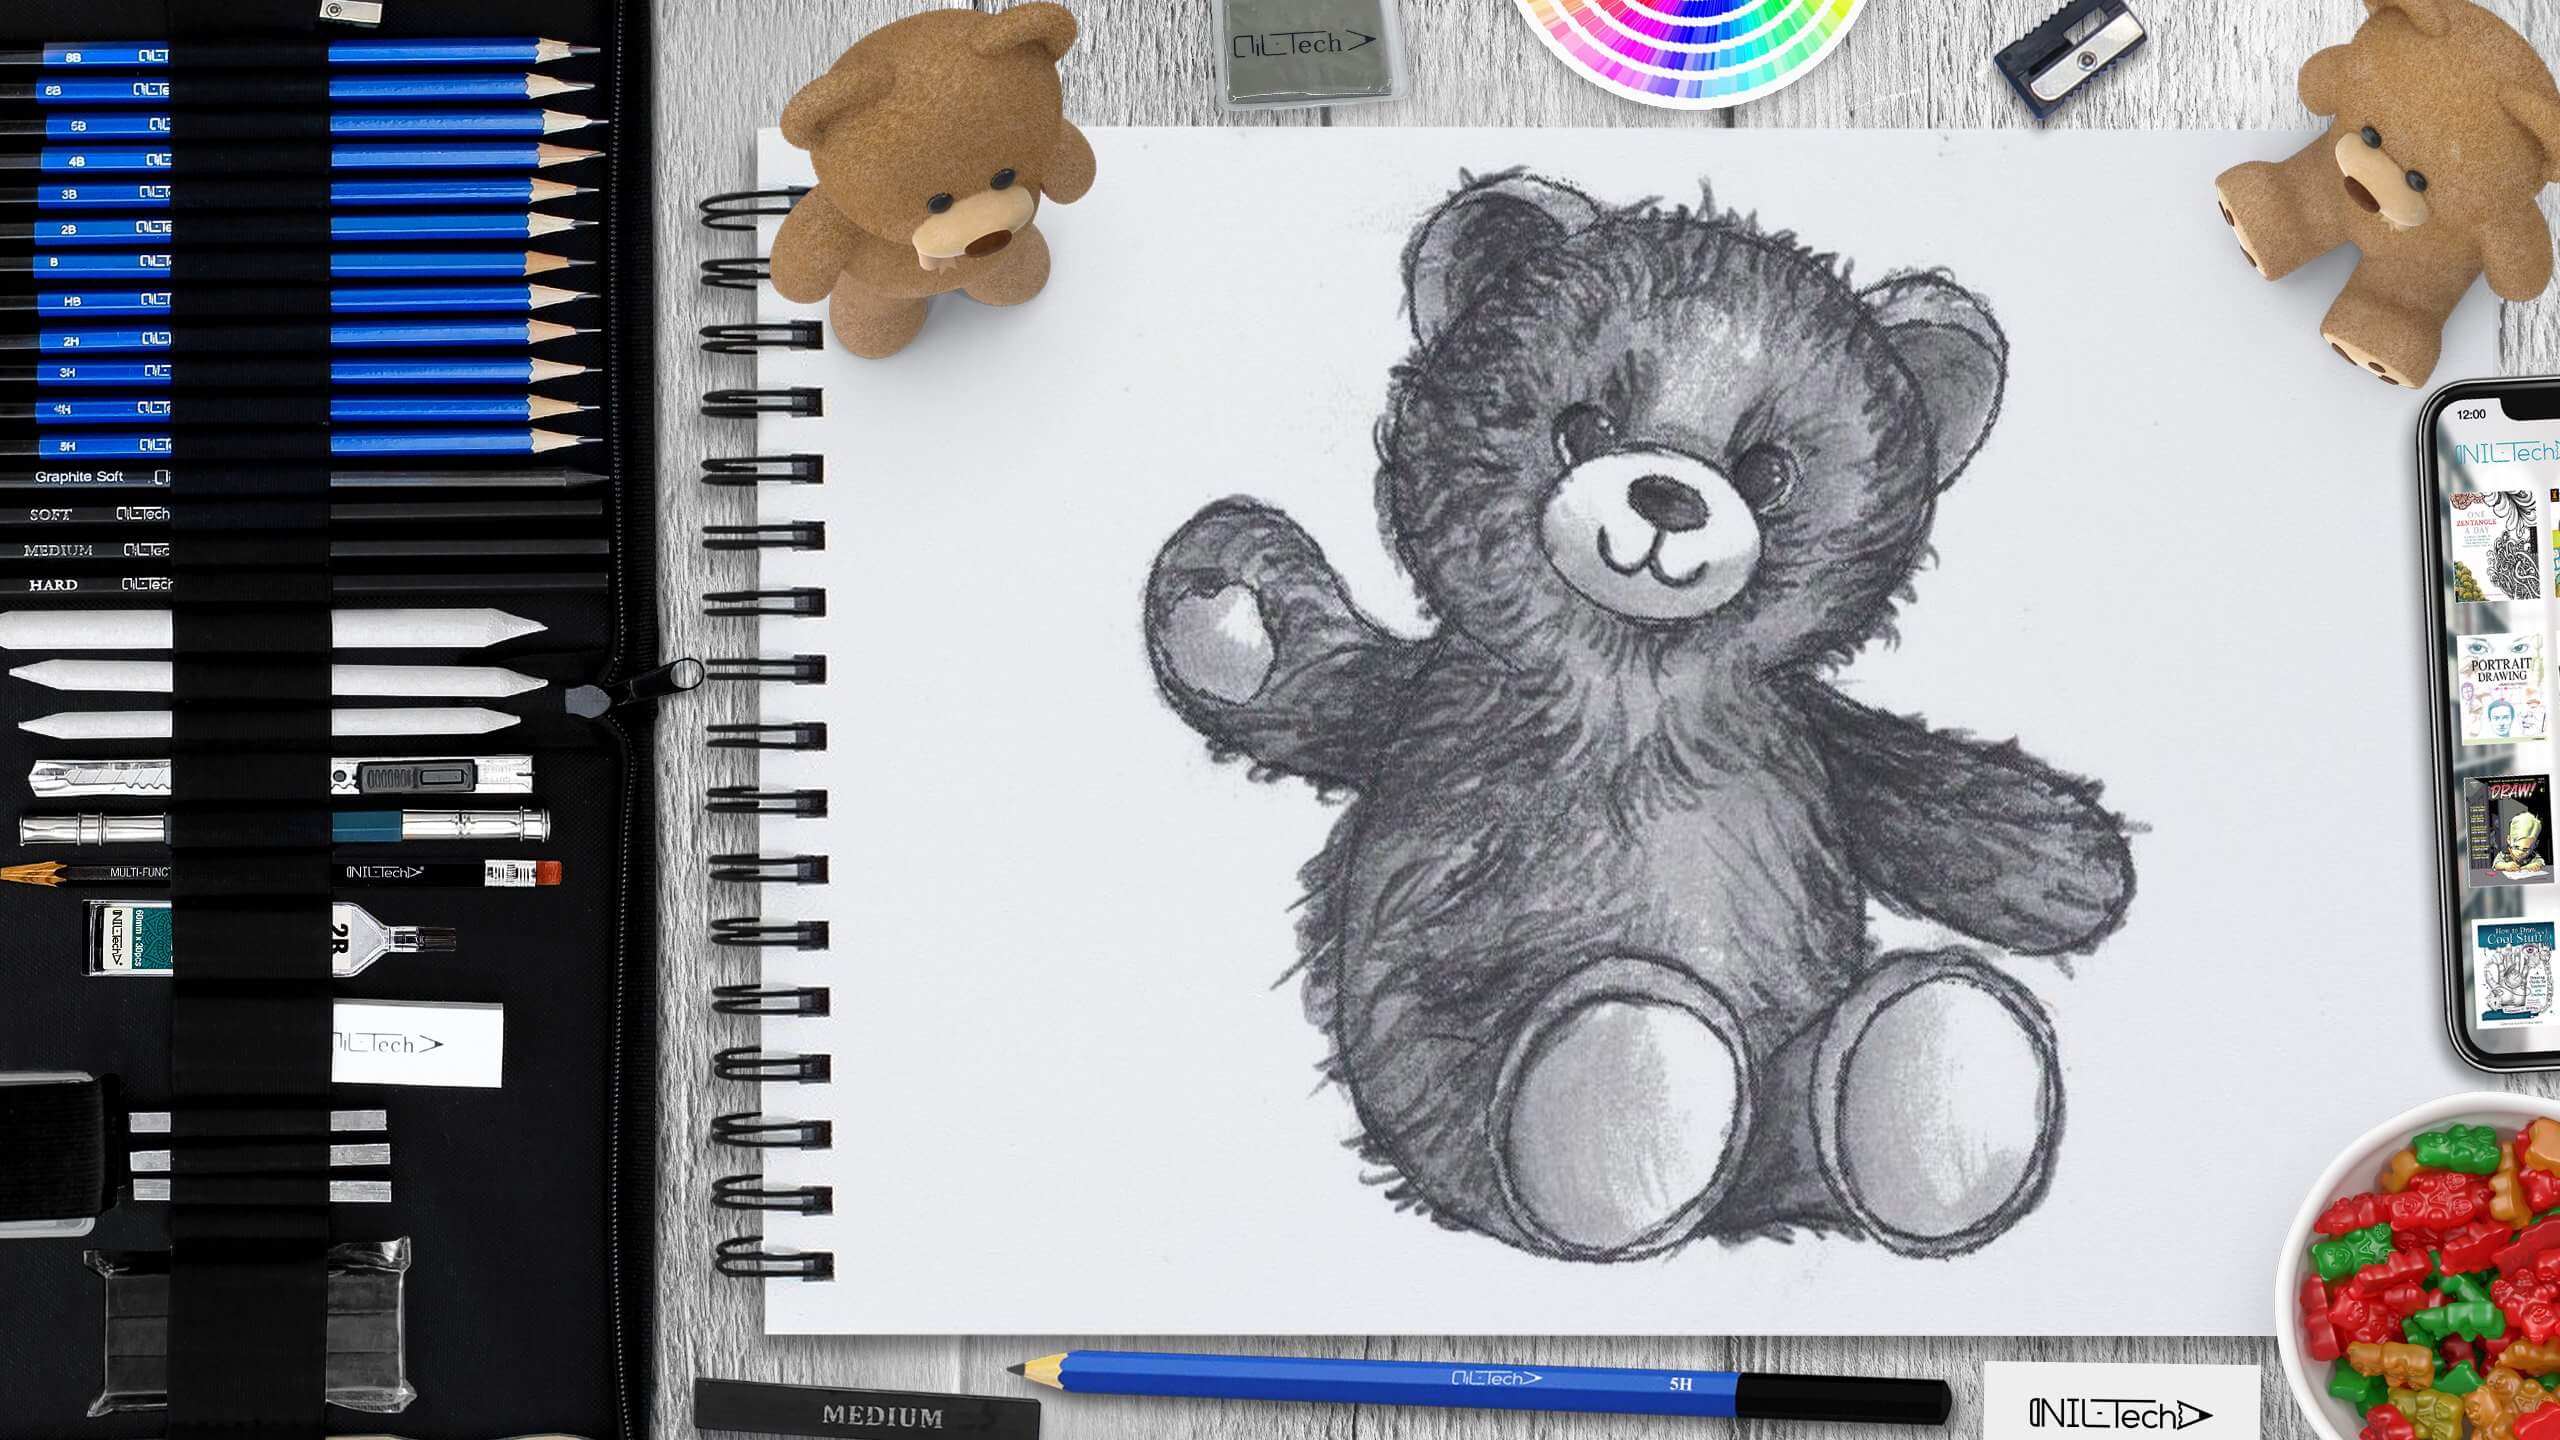 How to Draw the Cutest Teddy Bear with a Heart ! Easy Step-by-Step for Kids  - YouTube